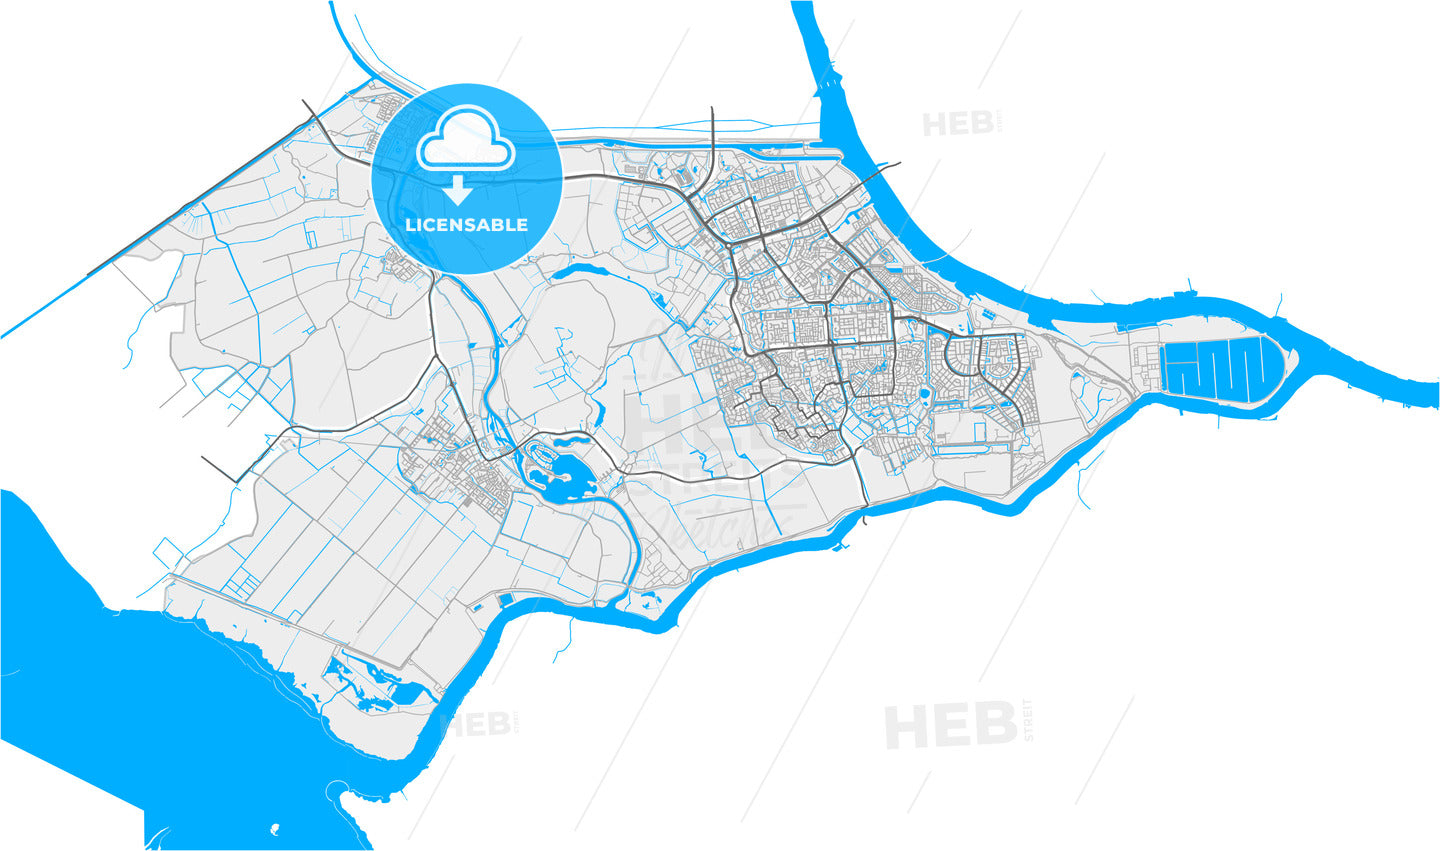 Nissewaard, South Holland, Netherlands, high quality vector map